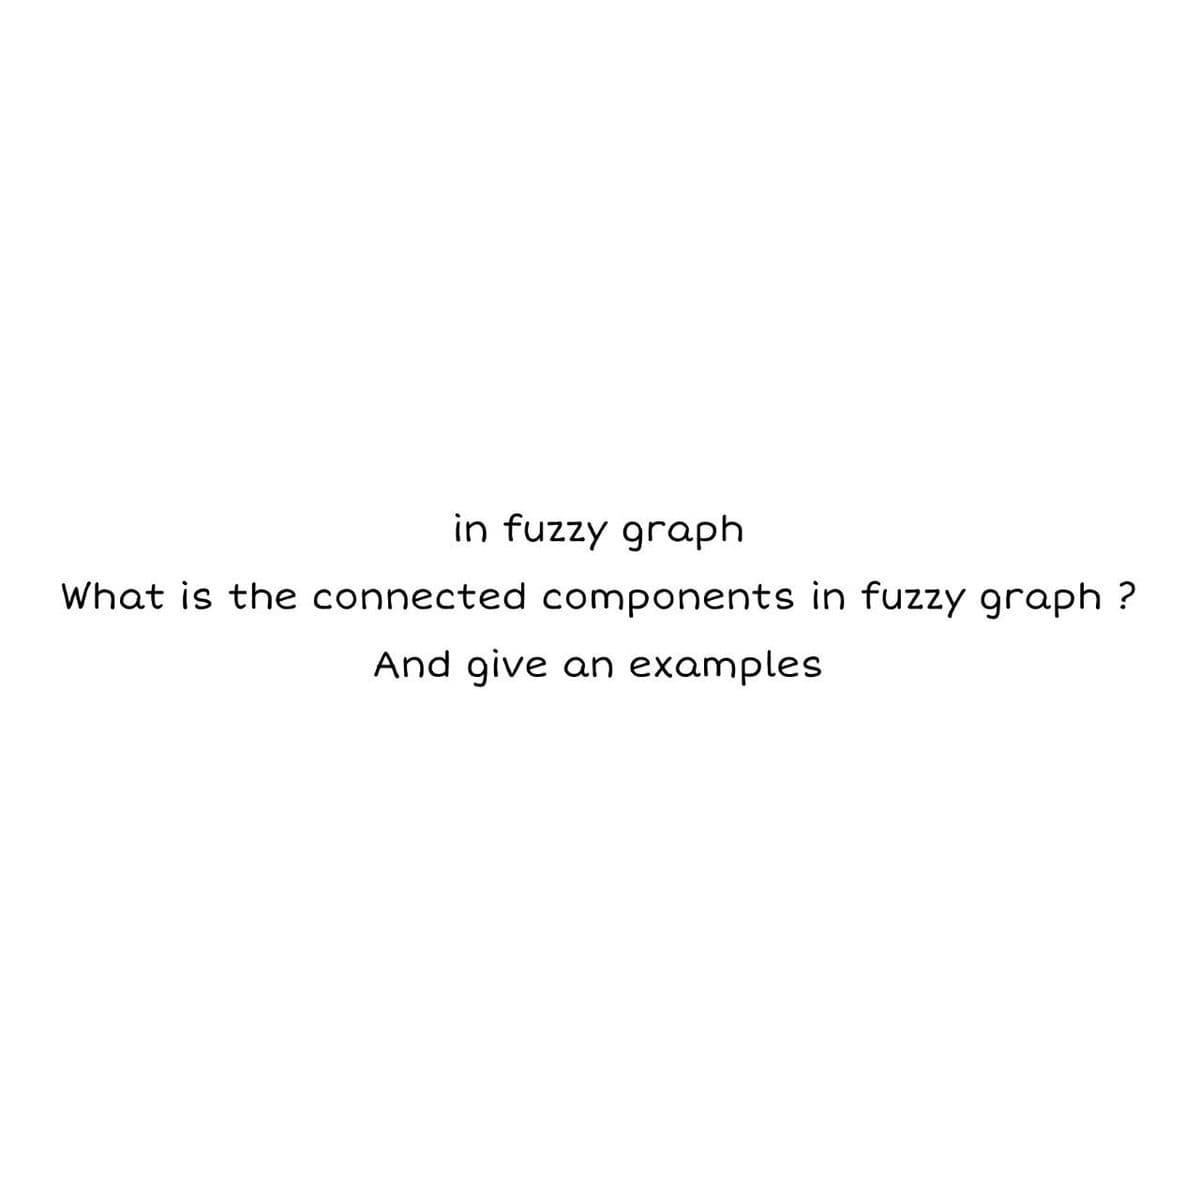 in fuzzy graph
What is the connected components in fuzzy graph ?
And give an examples